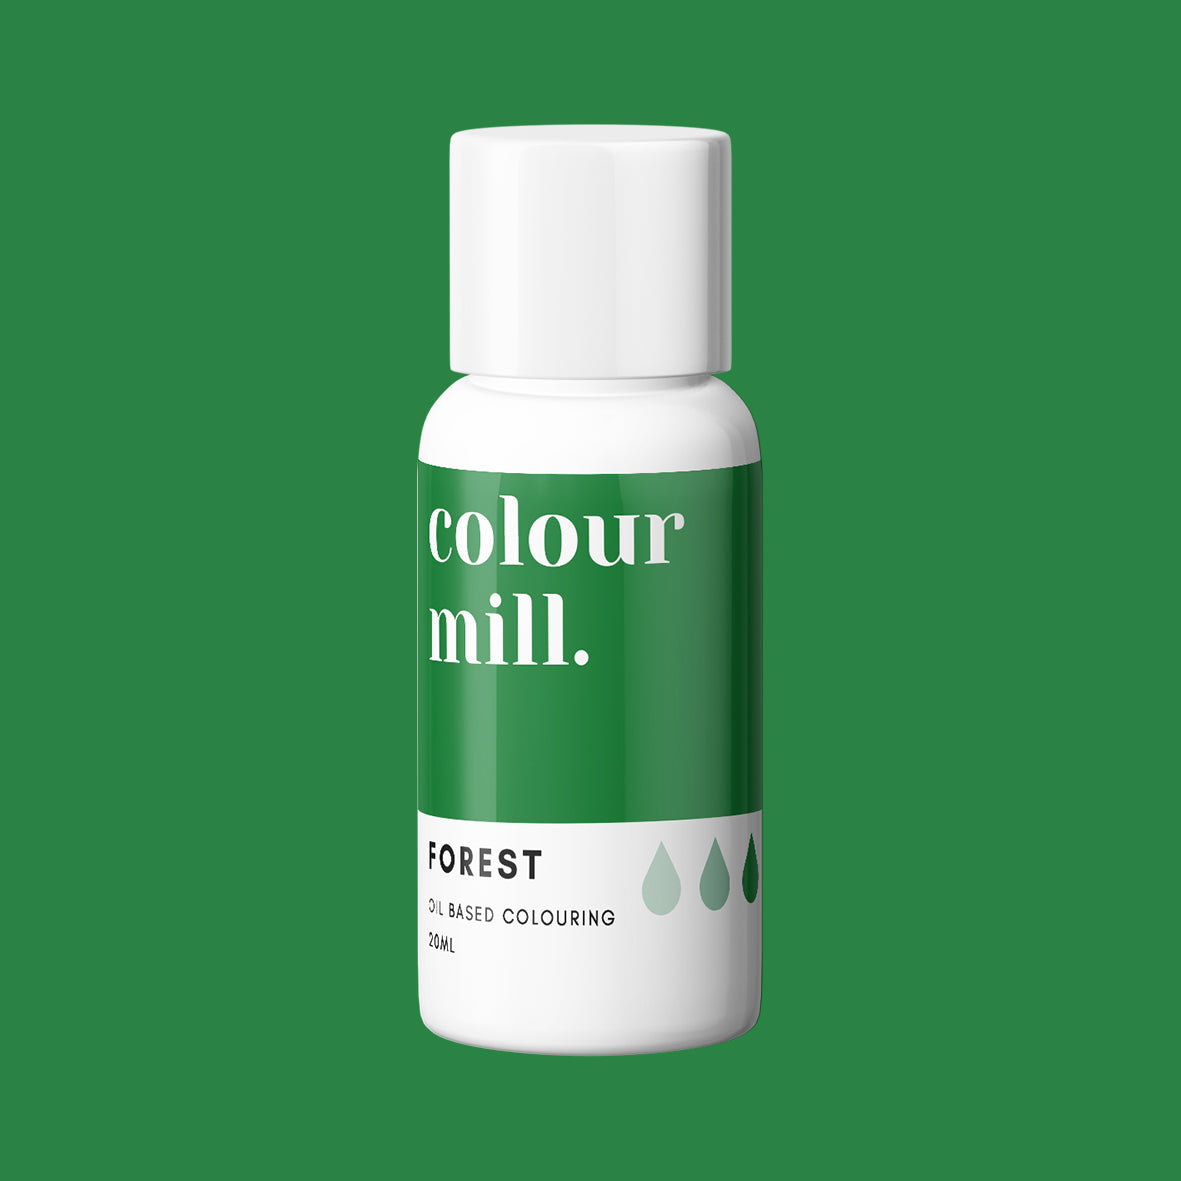 FOREST oil based concentrated icing colouring 20ml